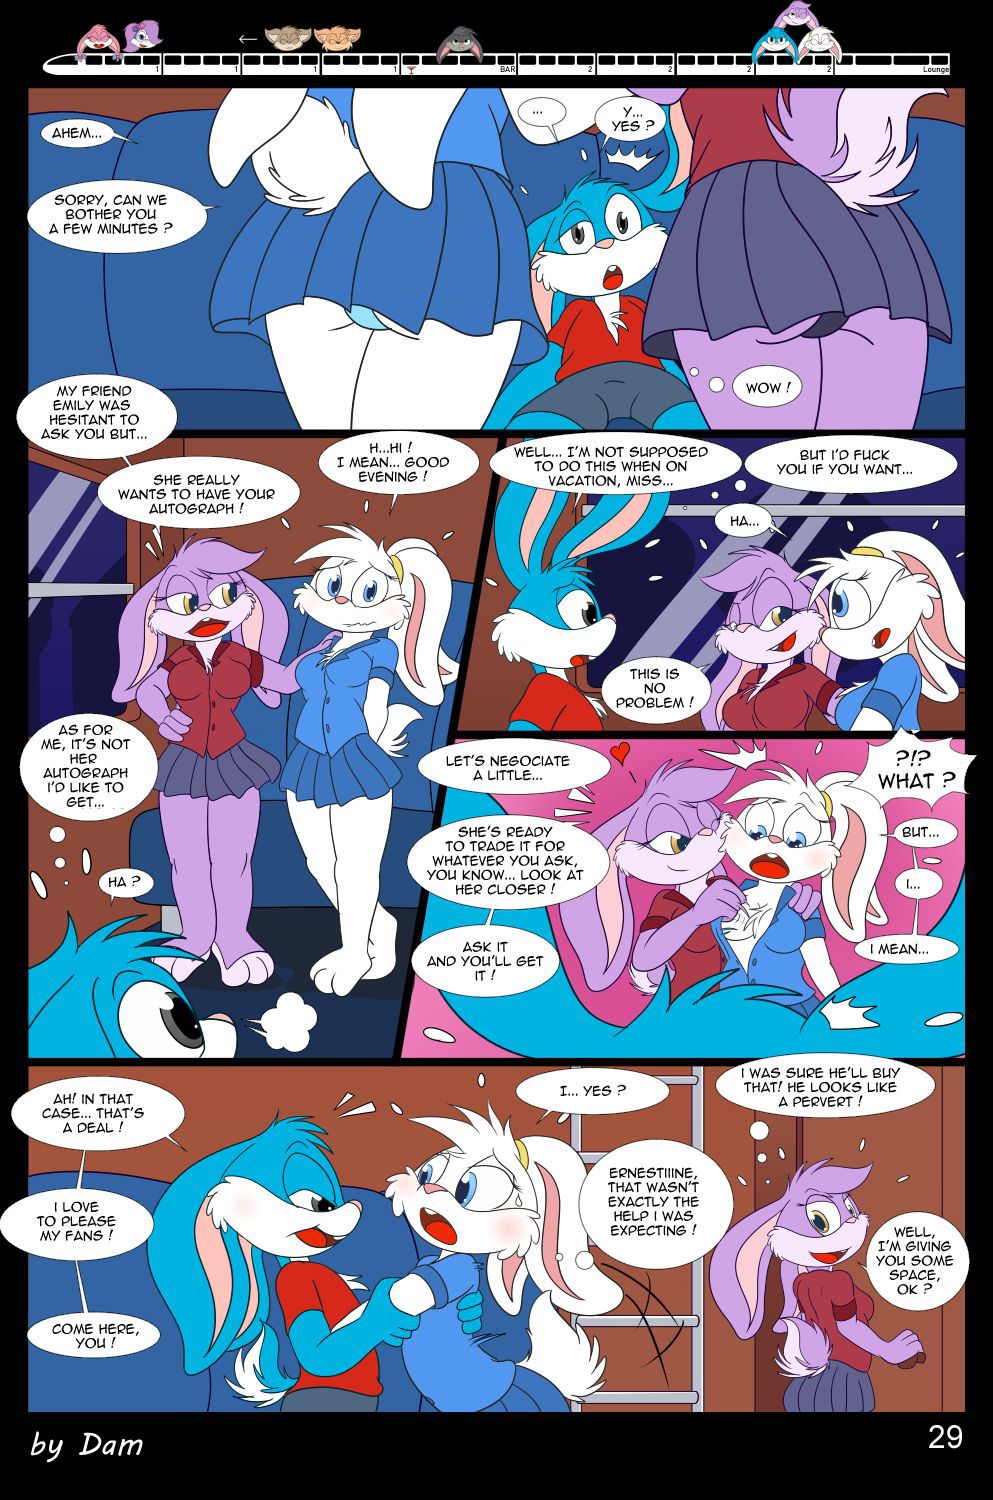 [Dam] Toons on a train [Ongoing] 29